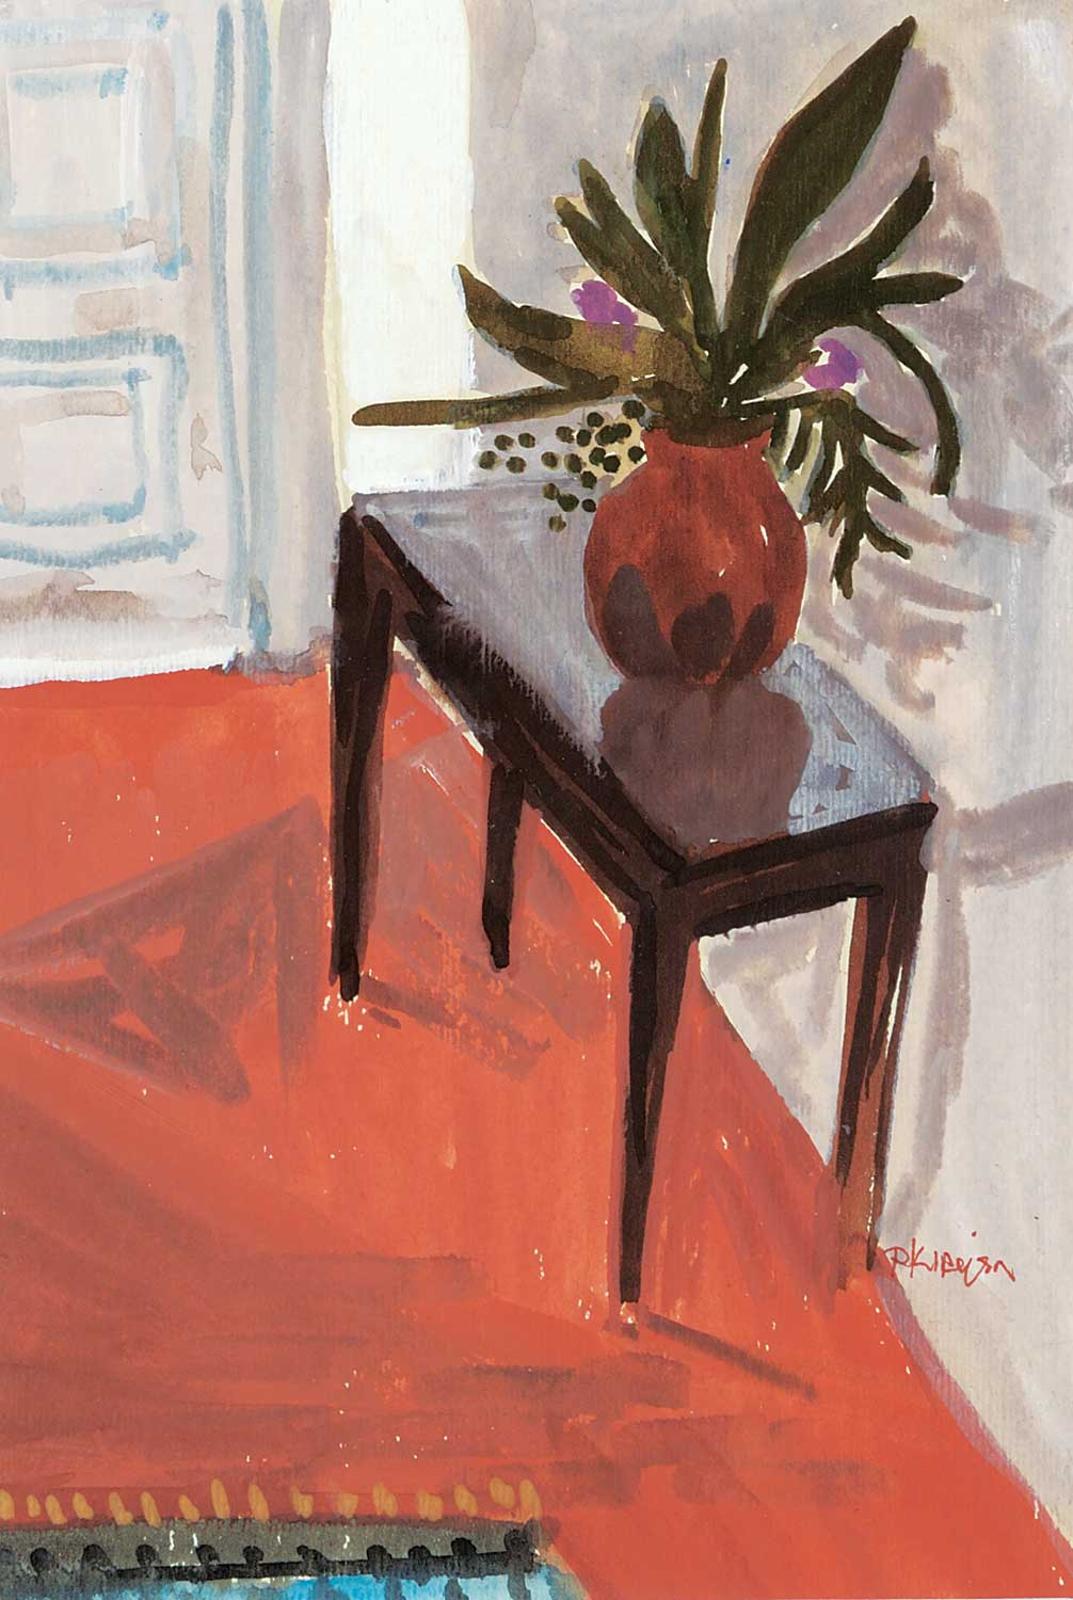 P.K. [Patricia Kathleen Page] Irwin - Untitled - The Hallway Plant